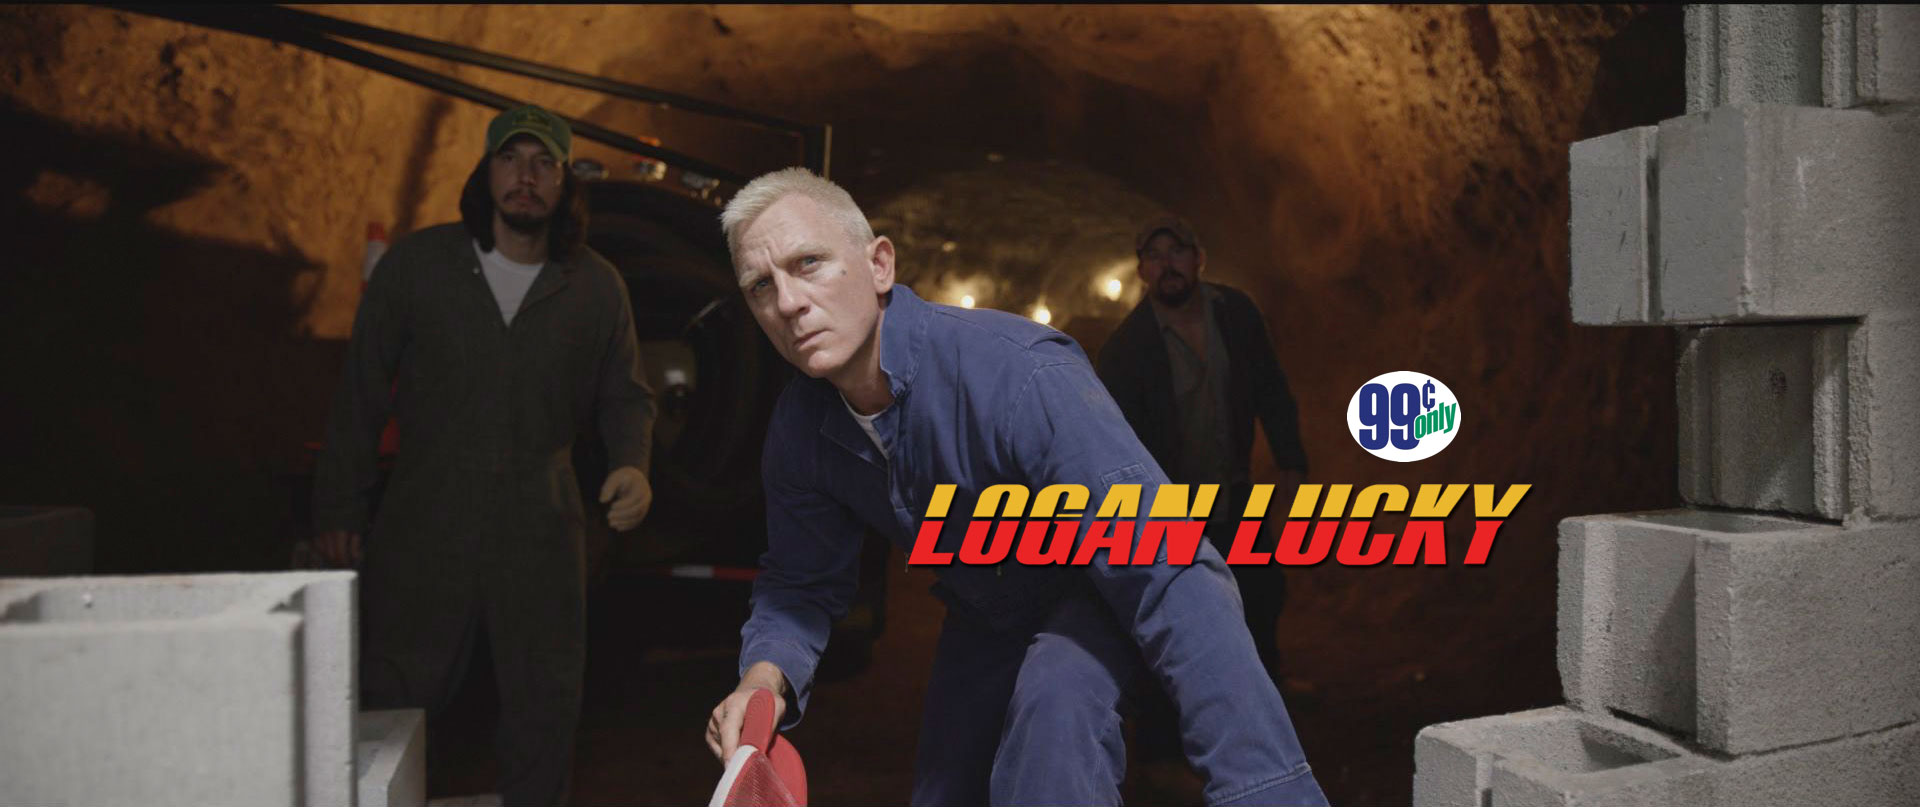 Geek insider, geekinsider, geekinsider. Com,, the itunes $0. 99 movie of the week: 'logan lucky', entertainment